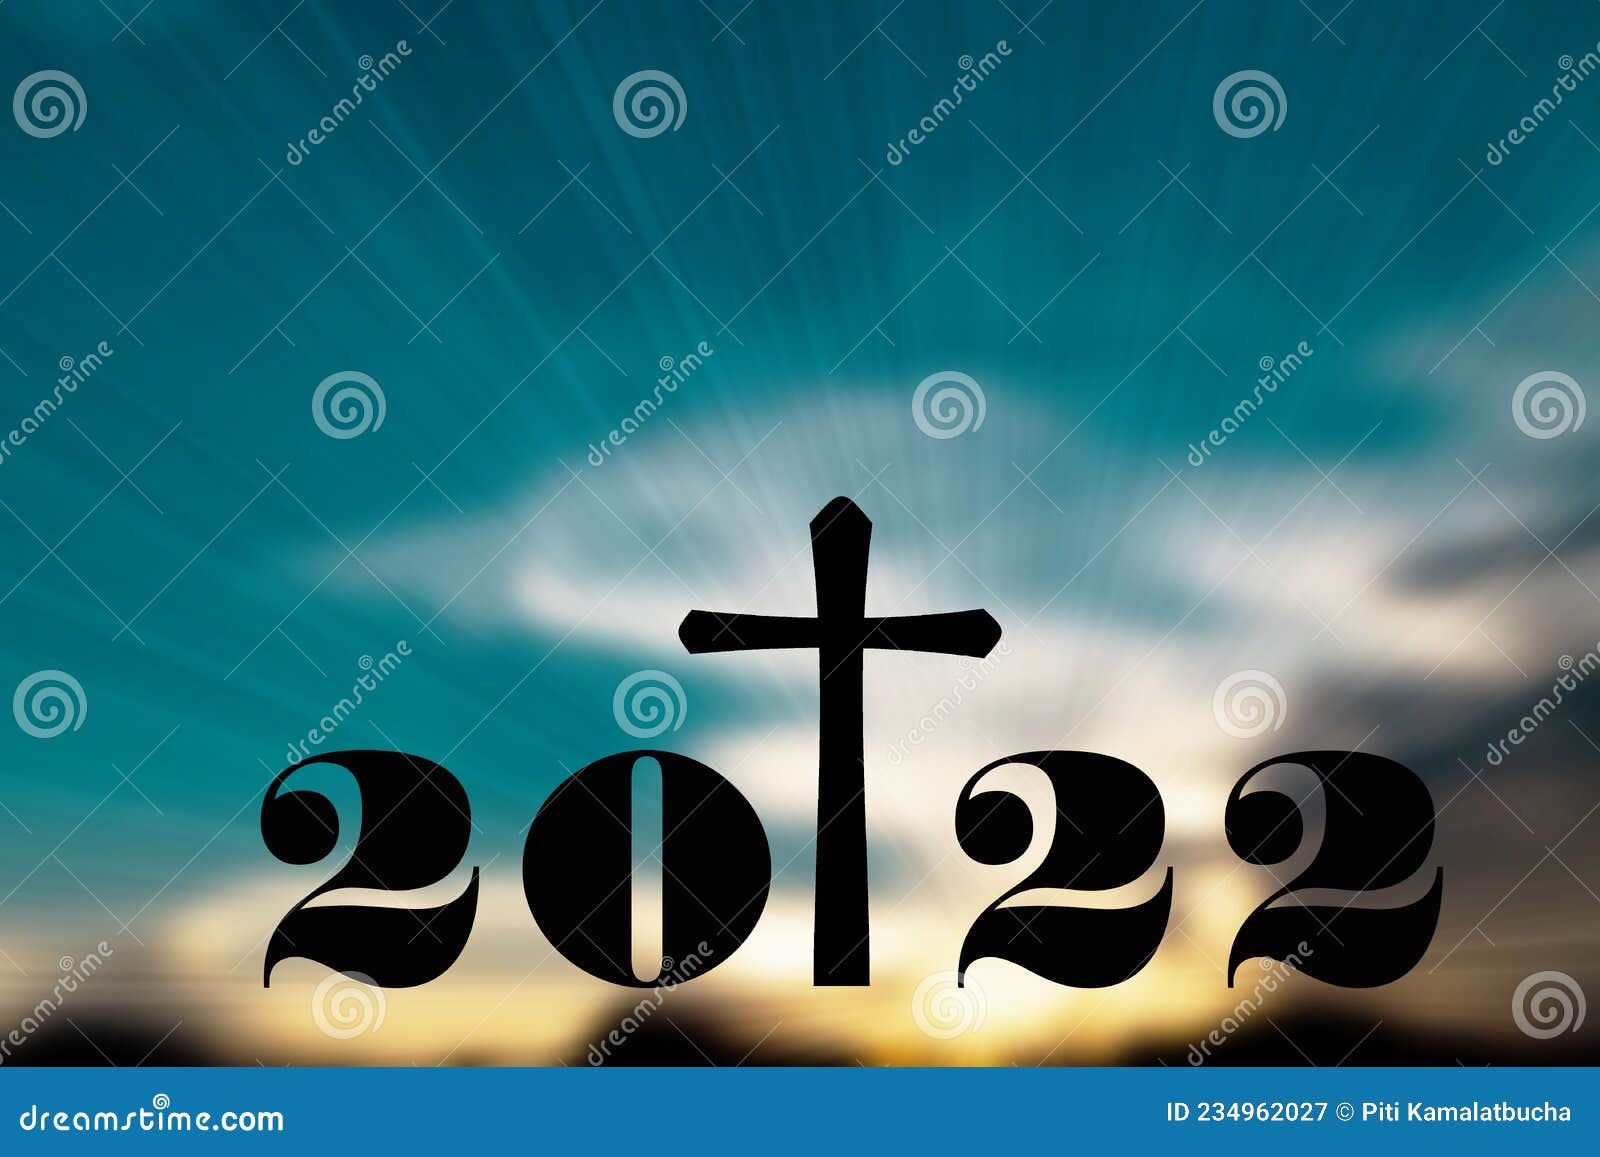 christian new year images